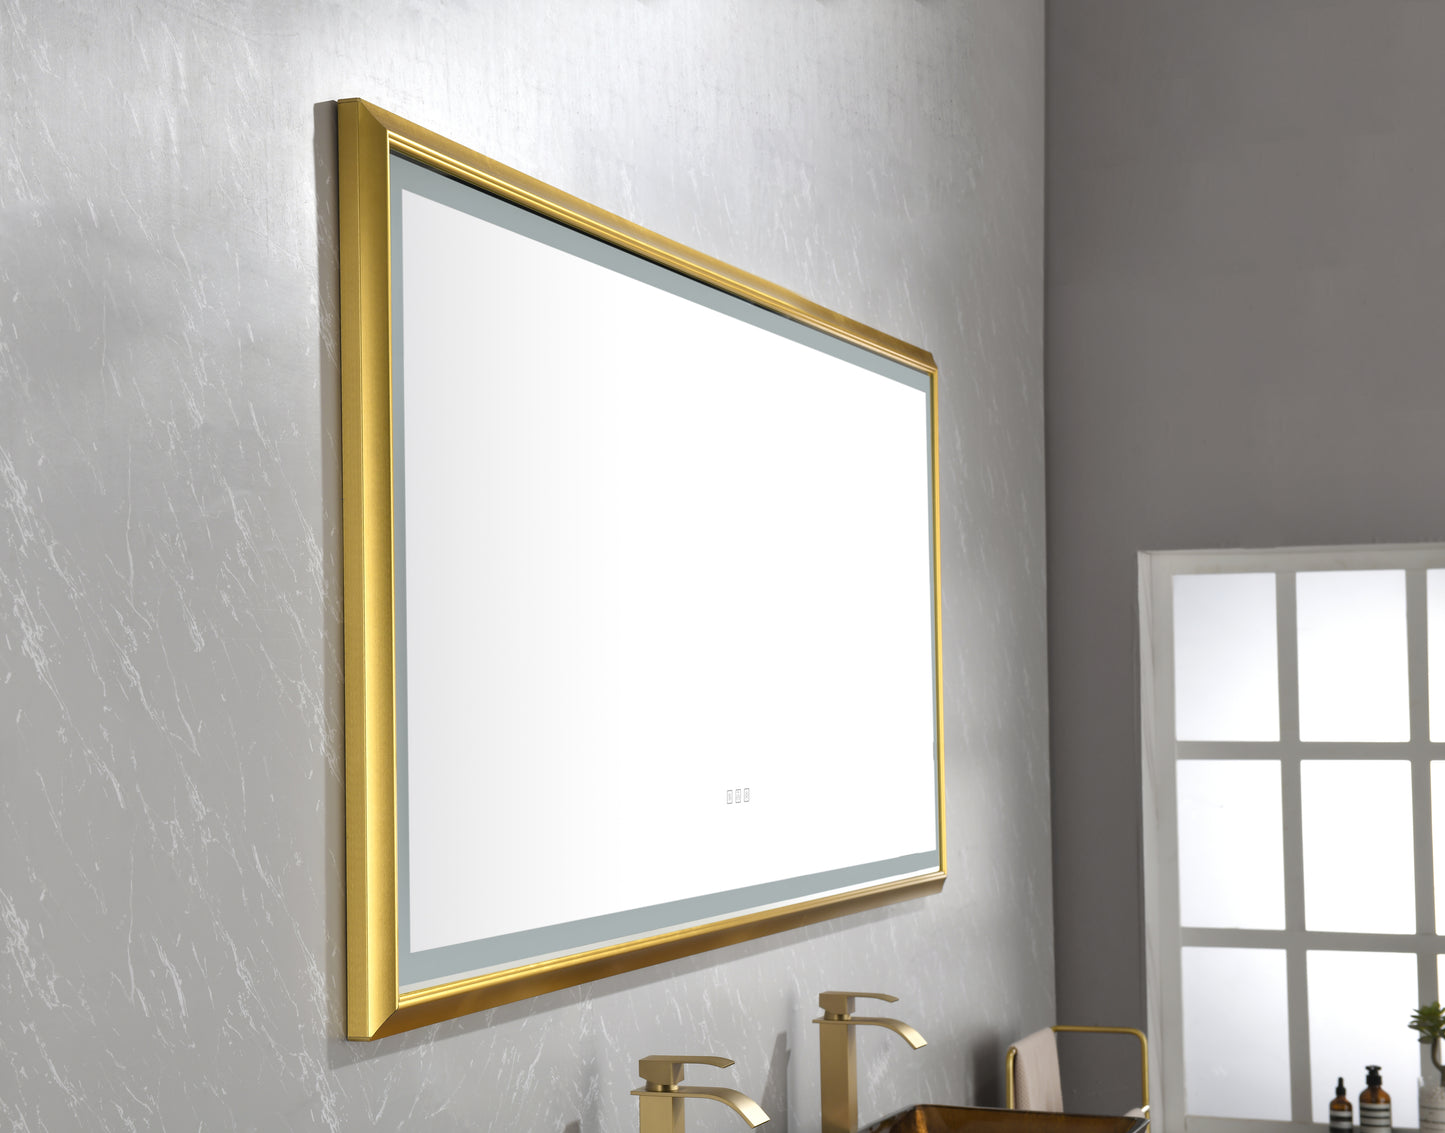 84 in. W x 36 in. H Oversized Rectangular Gold Framed LED Mirror Anti-Fog Dimmable Wall Mount Bathroom Vanity Mirror  HD Wall Mirror Kit For Gym And Dance Studio 36X 84Inches With